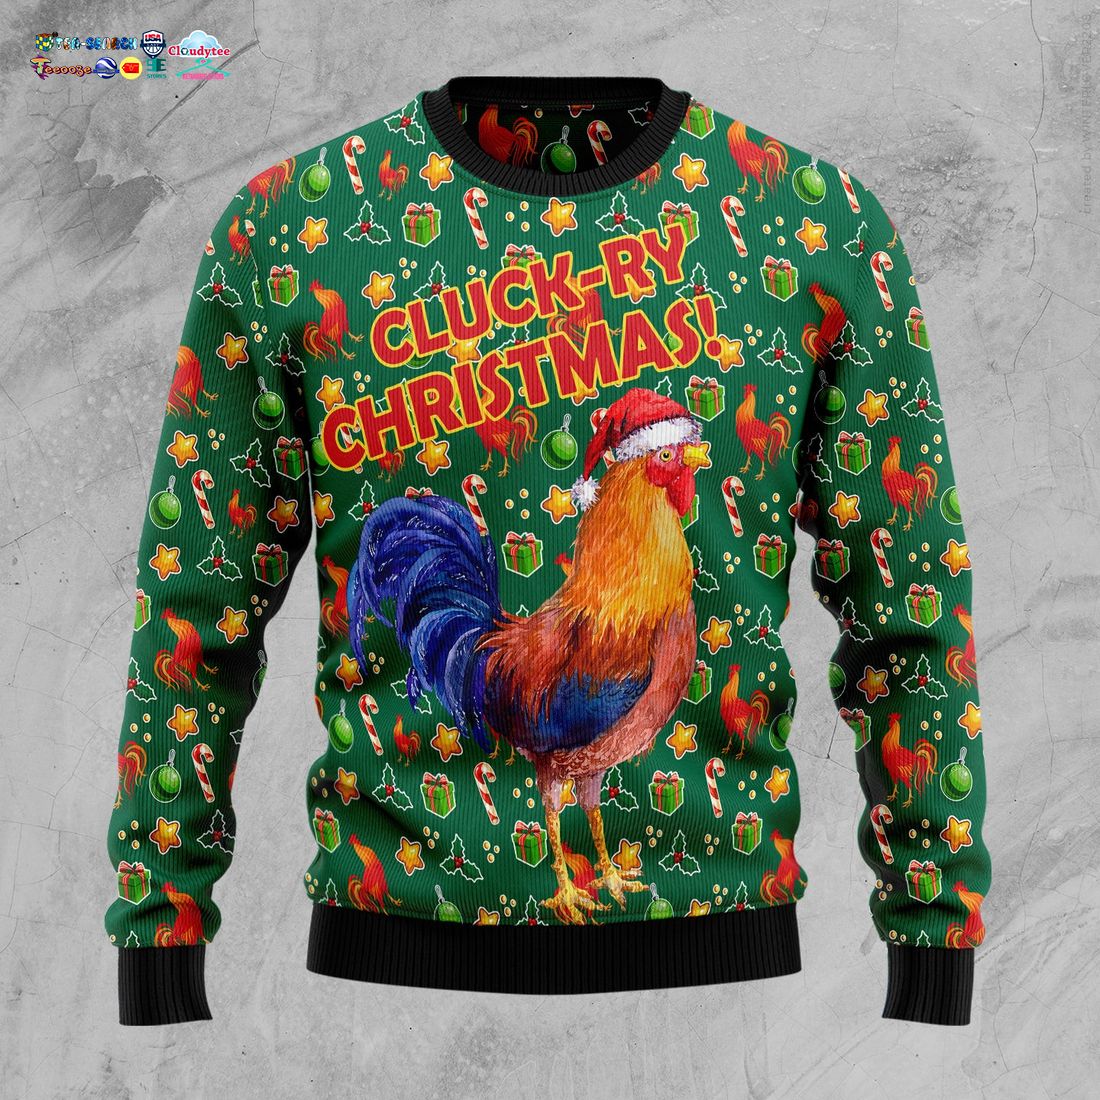 Rooster Cluck-ry Christmas Ugly Christmas Sweater